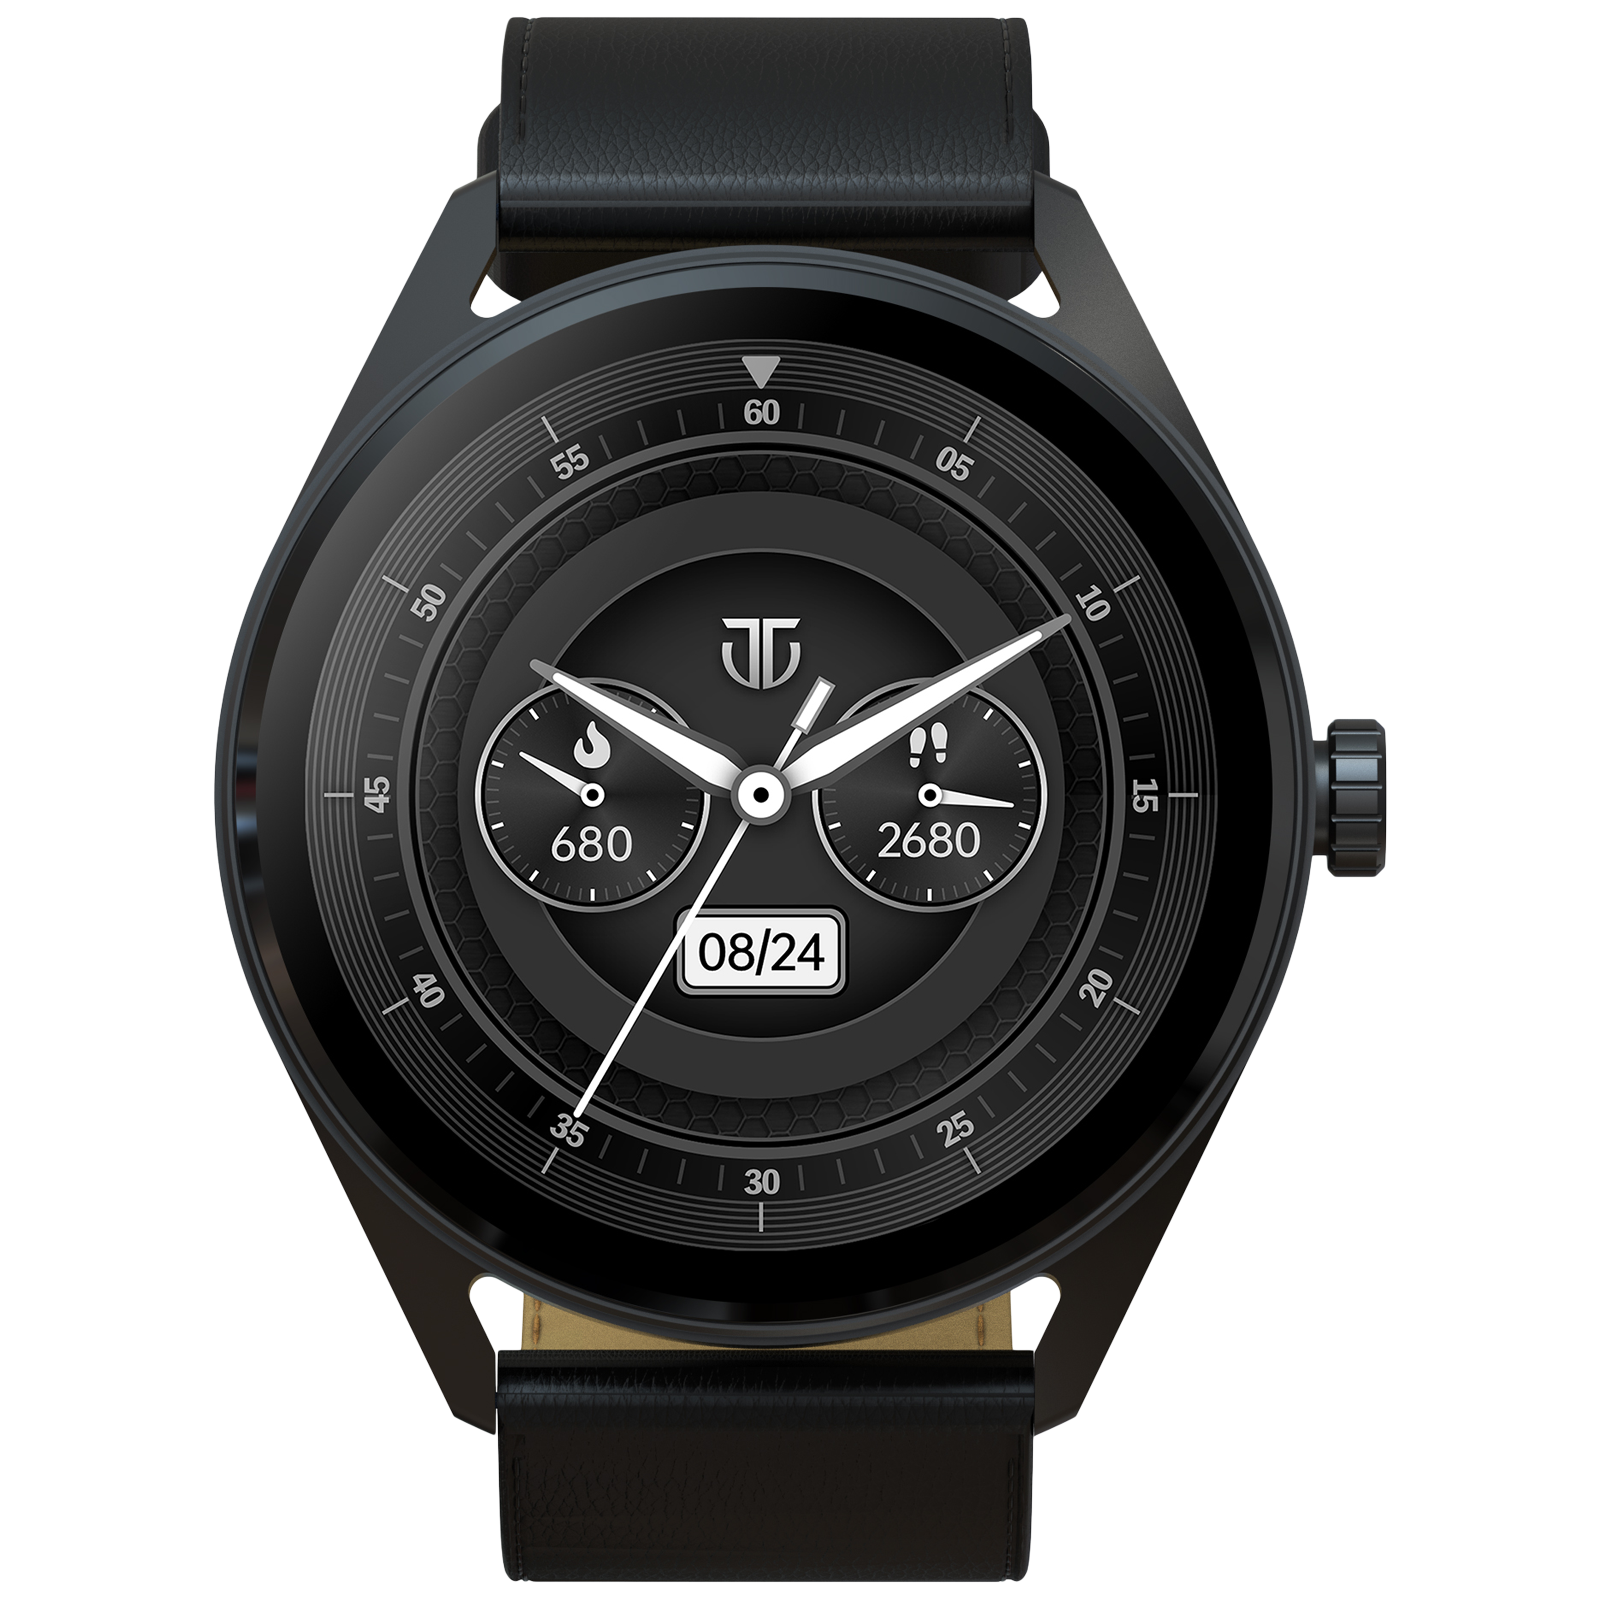 TITAN Crest Smartwatch with Bluetooth Calling (36.3mm AMOLED Display, IP68 Water Resistant, Black Leather Strap)